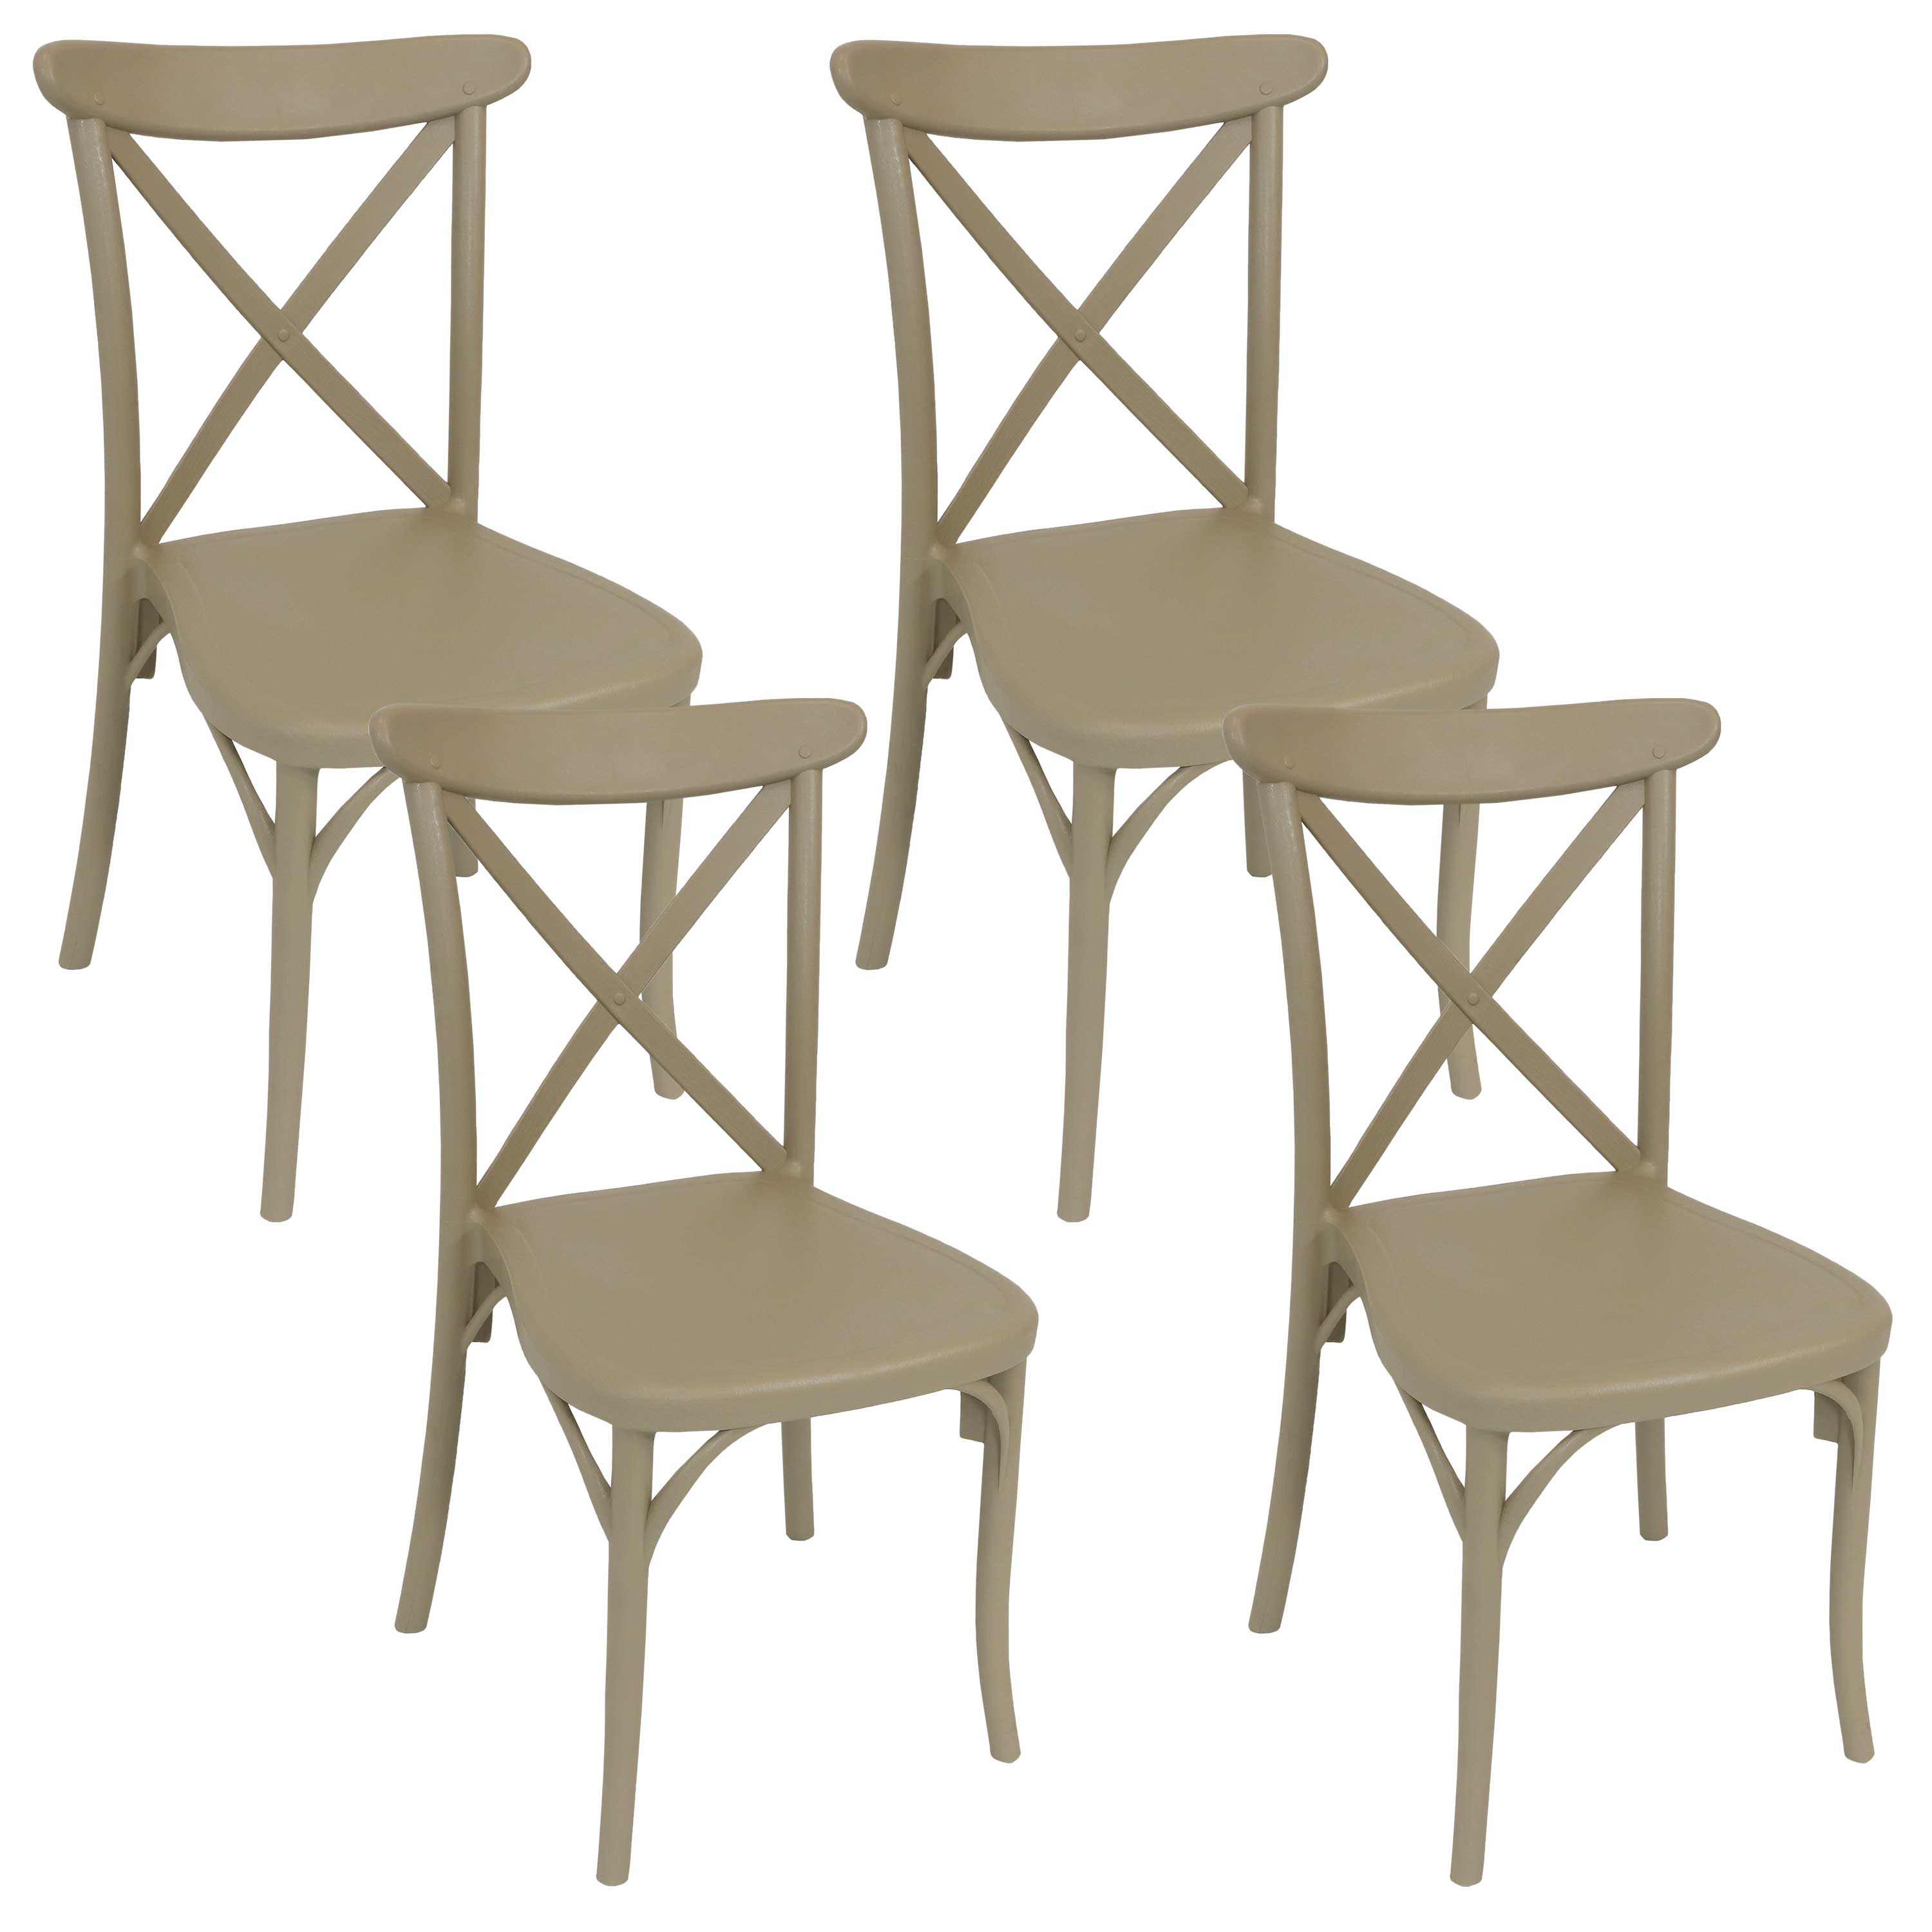 Sunnydaze Bellemead Plastic Patio Dining Chair - Coffee - 4-Pack